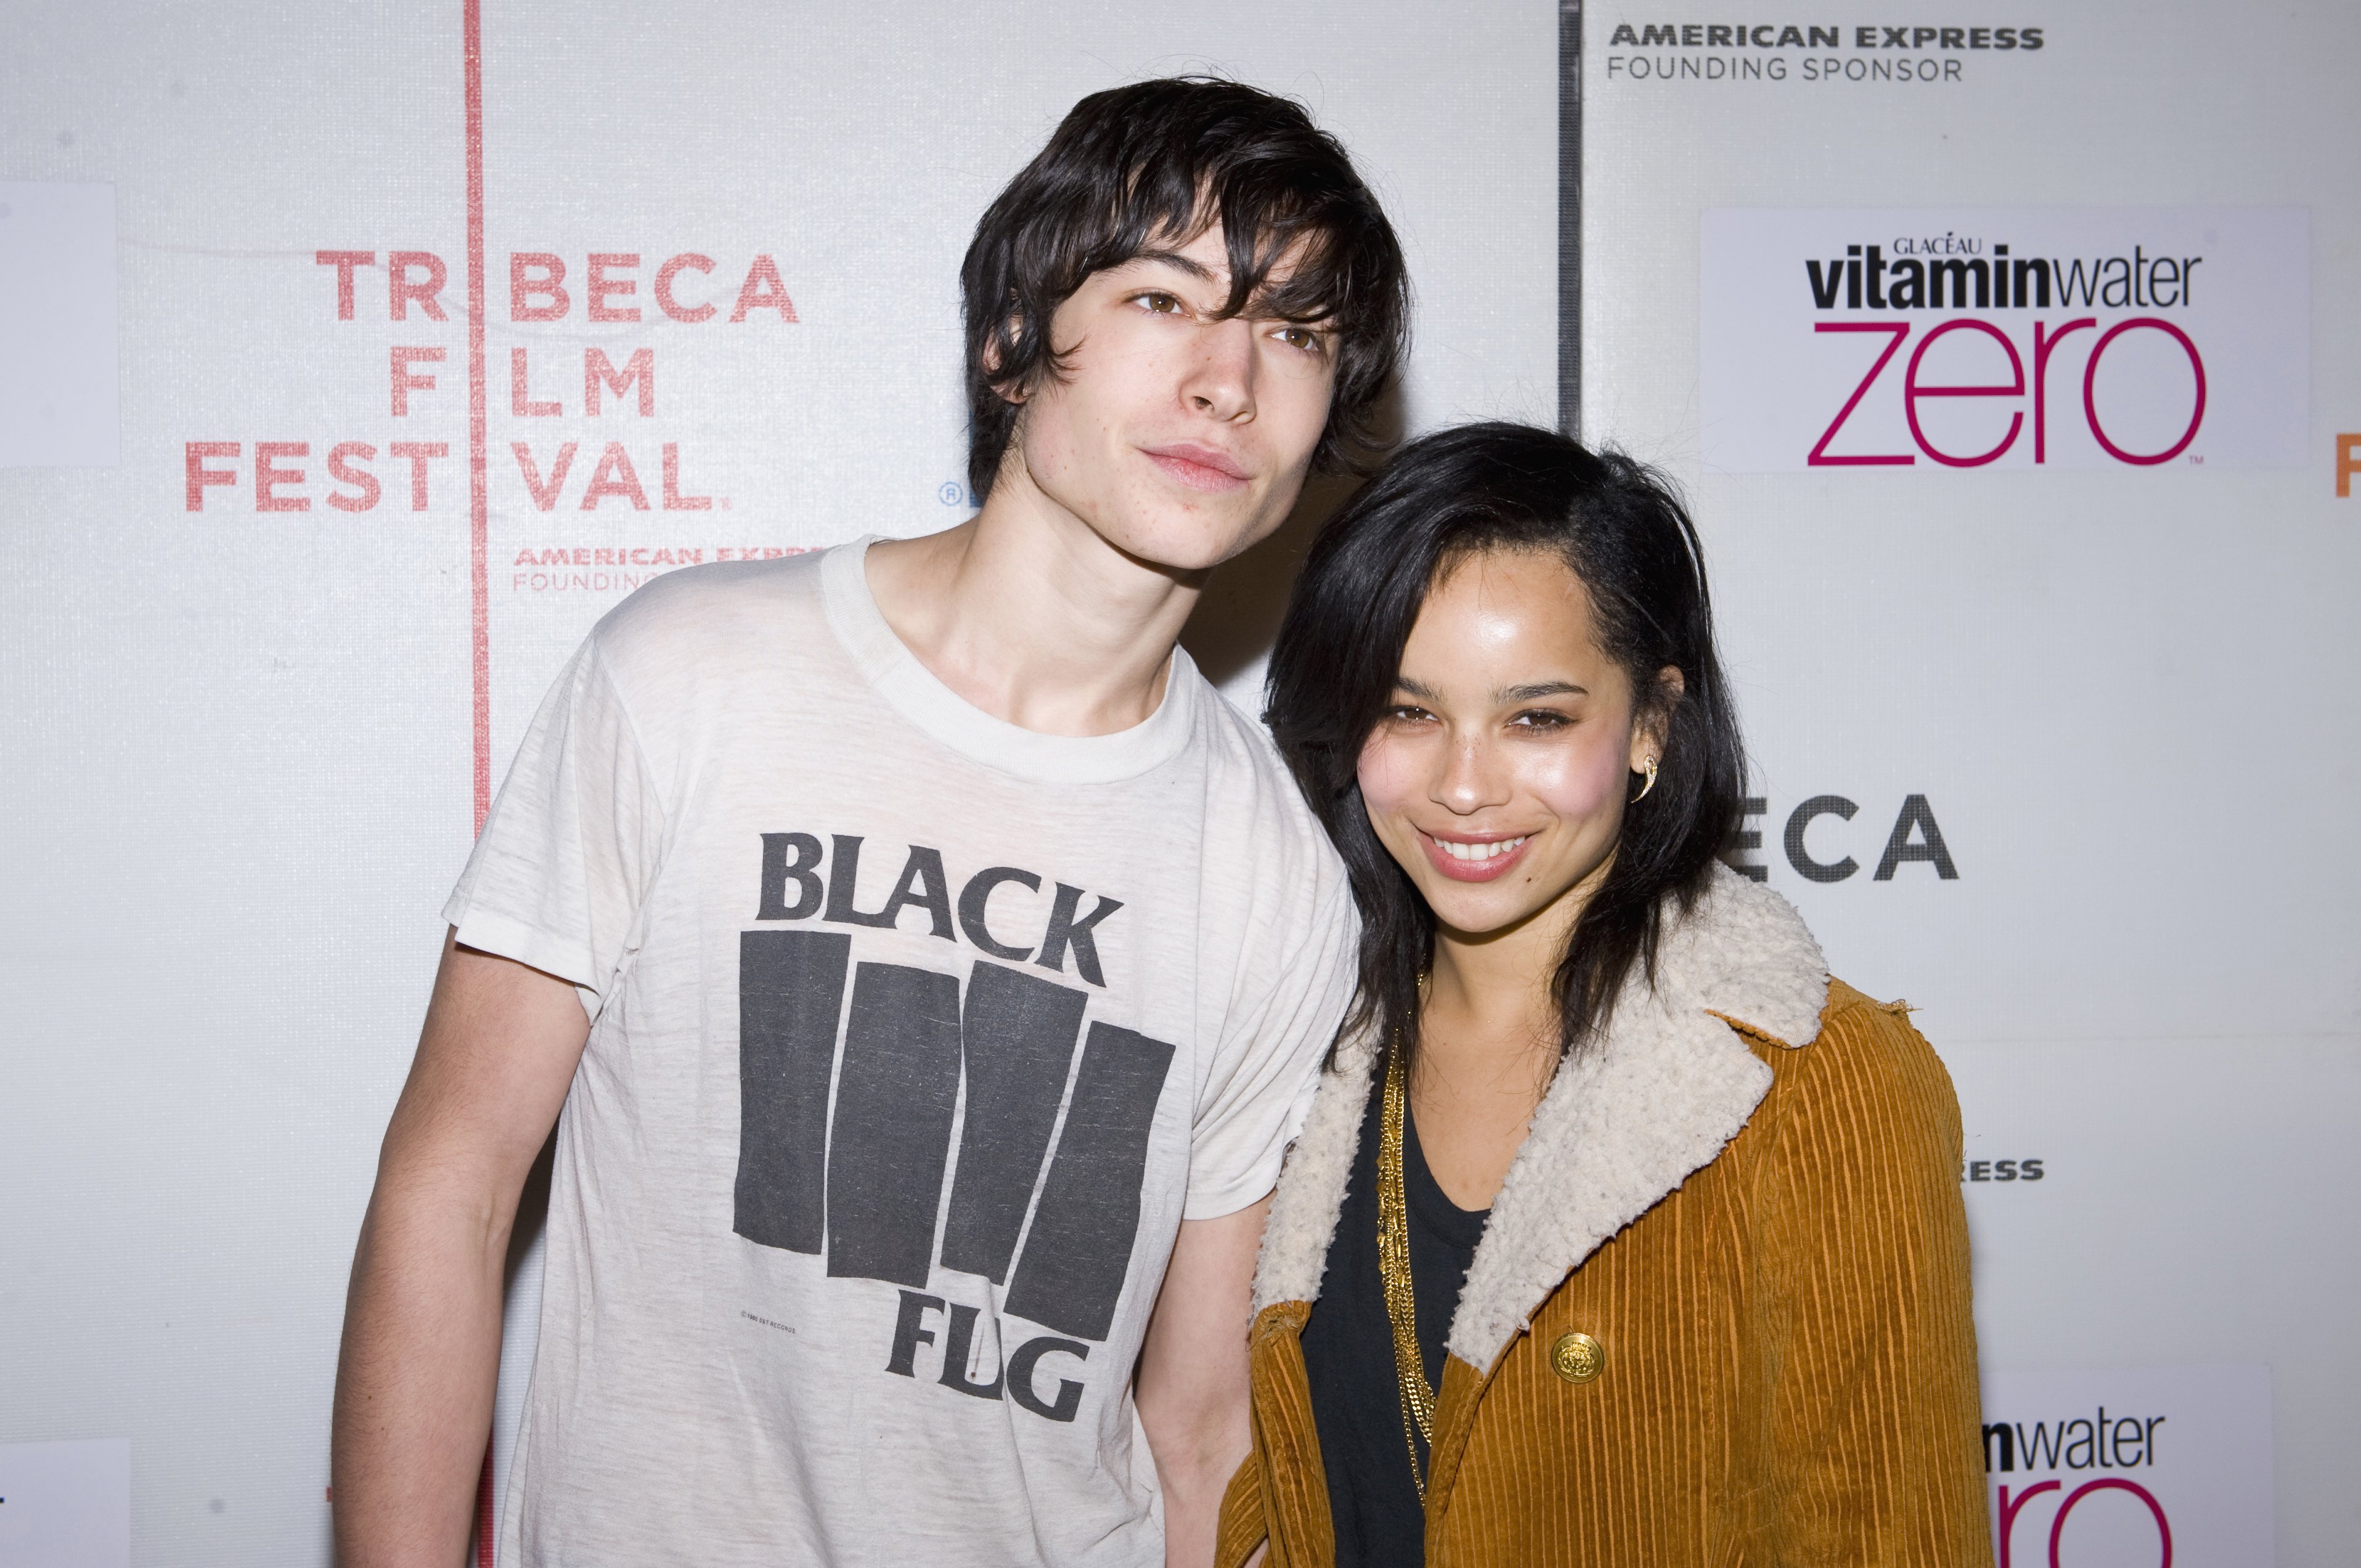 Ezra Miller and Zoe Kravitz at the premiere of "Every Day" during the 2010 Tribeca Film Festival in New York City. | Source: Getty Images